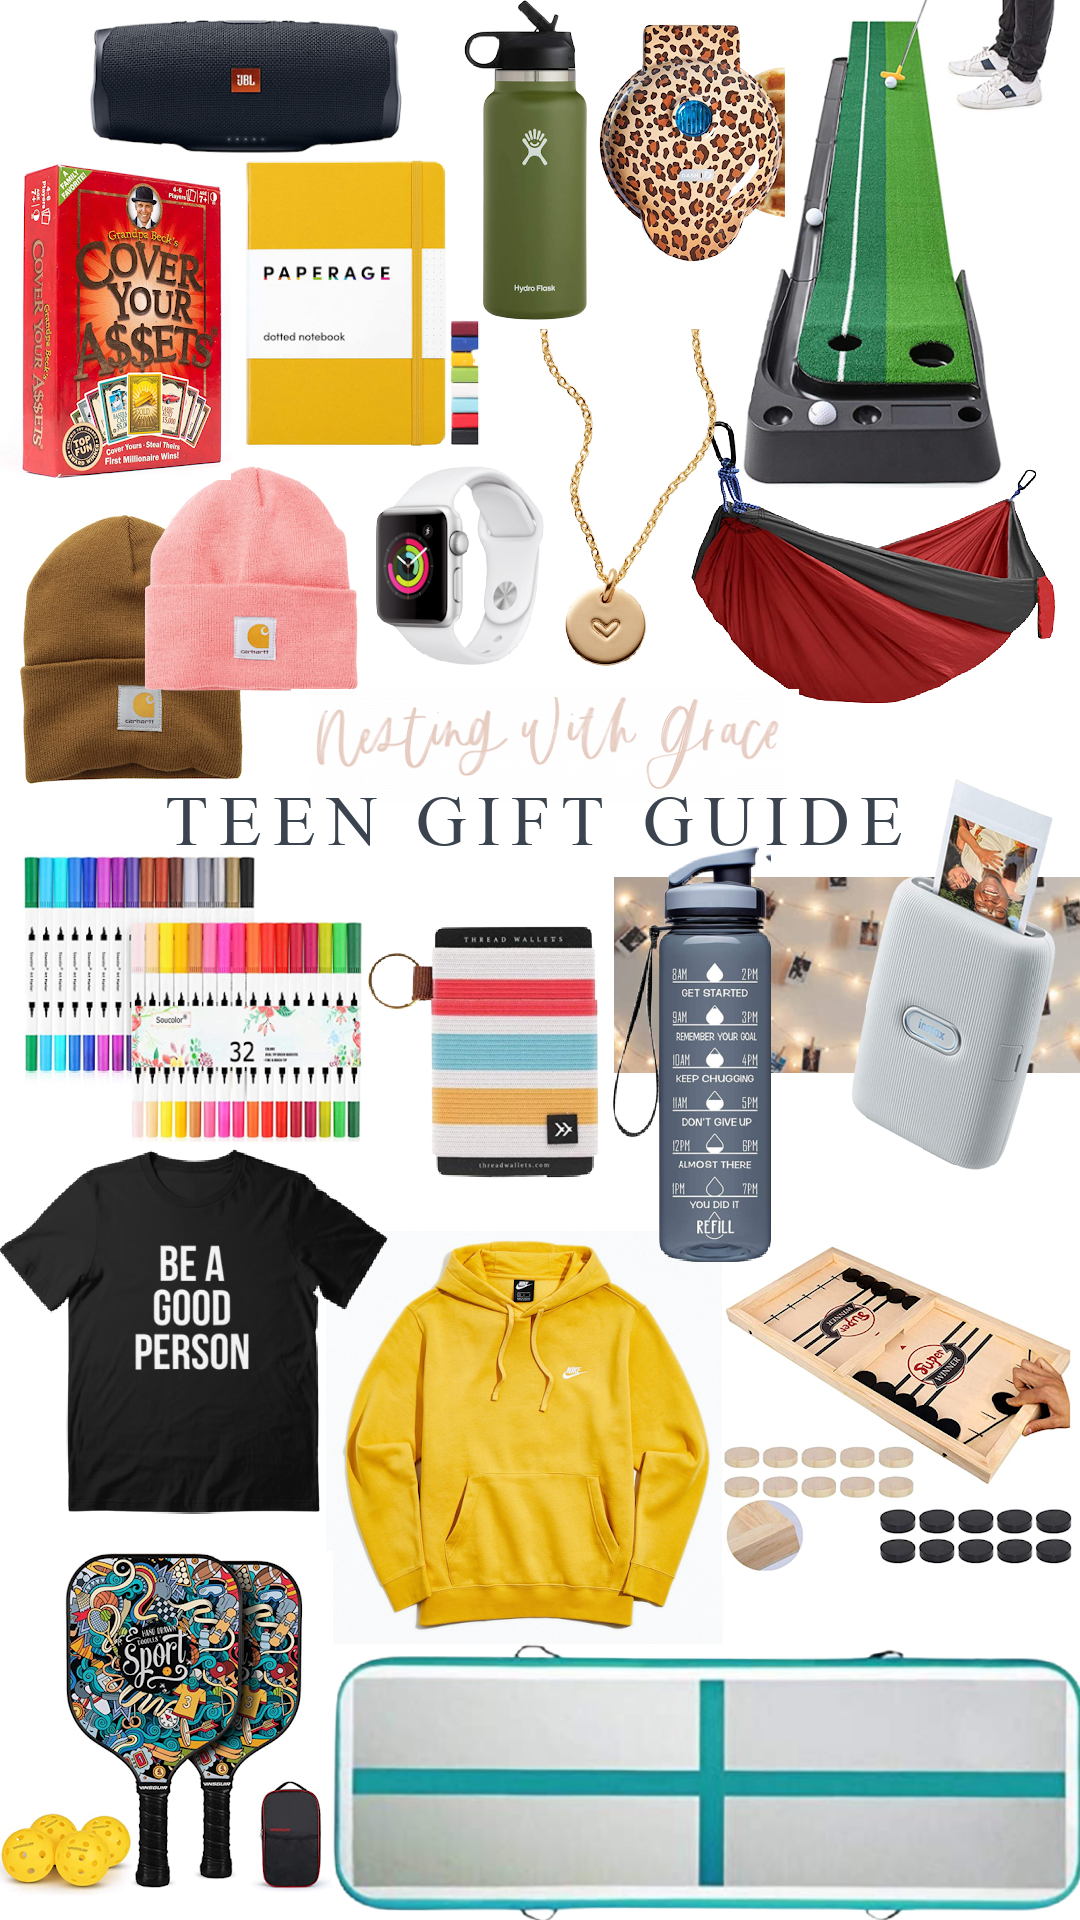 Gift Ideas for Teen Girls This Gift Guide Packed Full of the Best